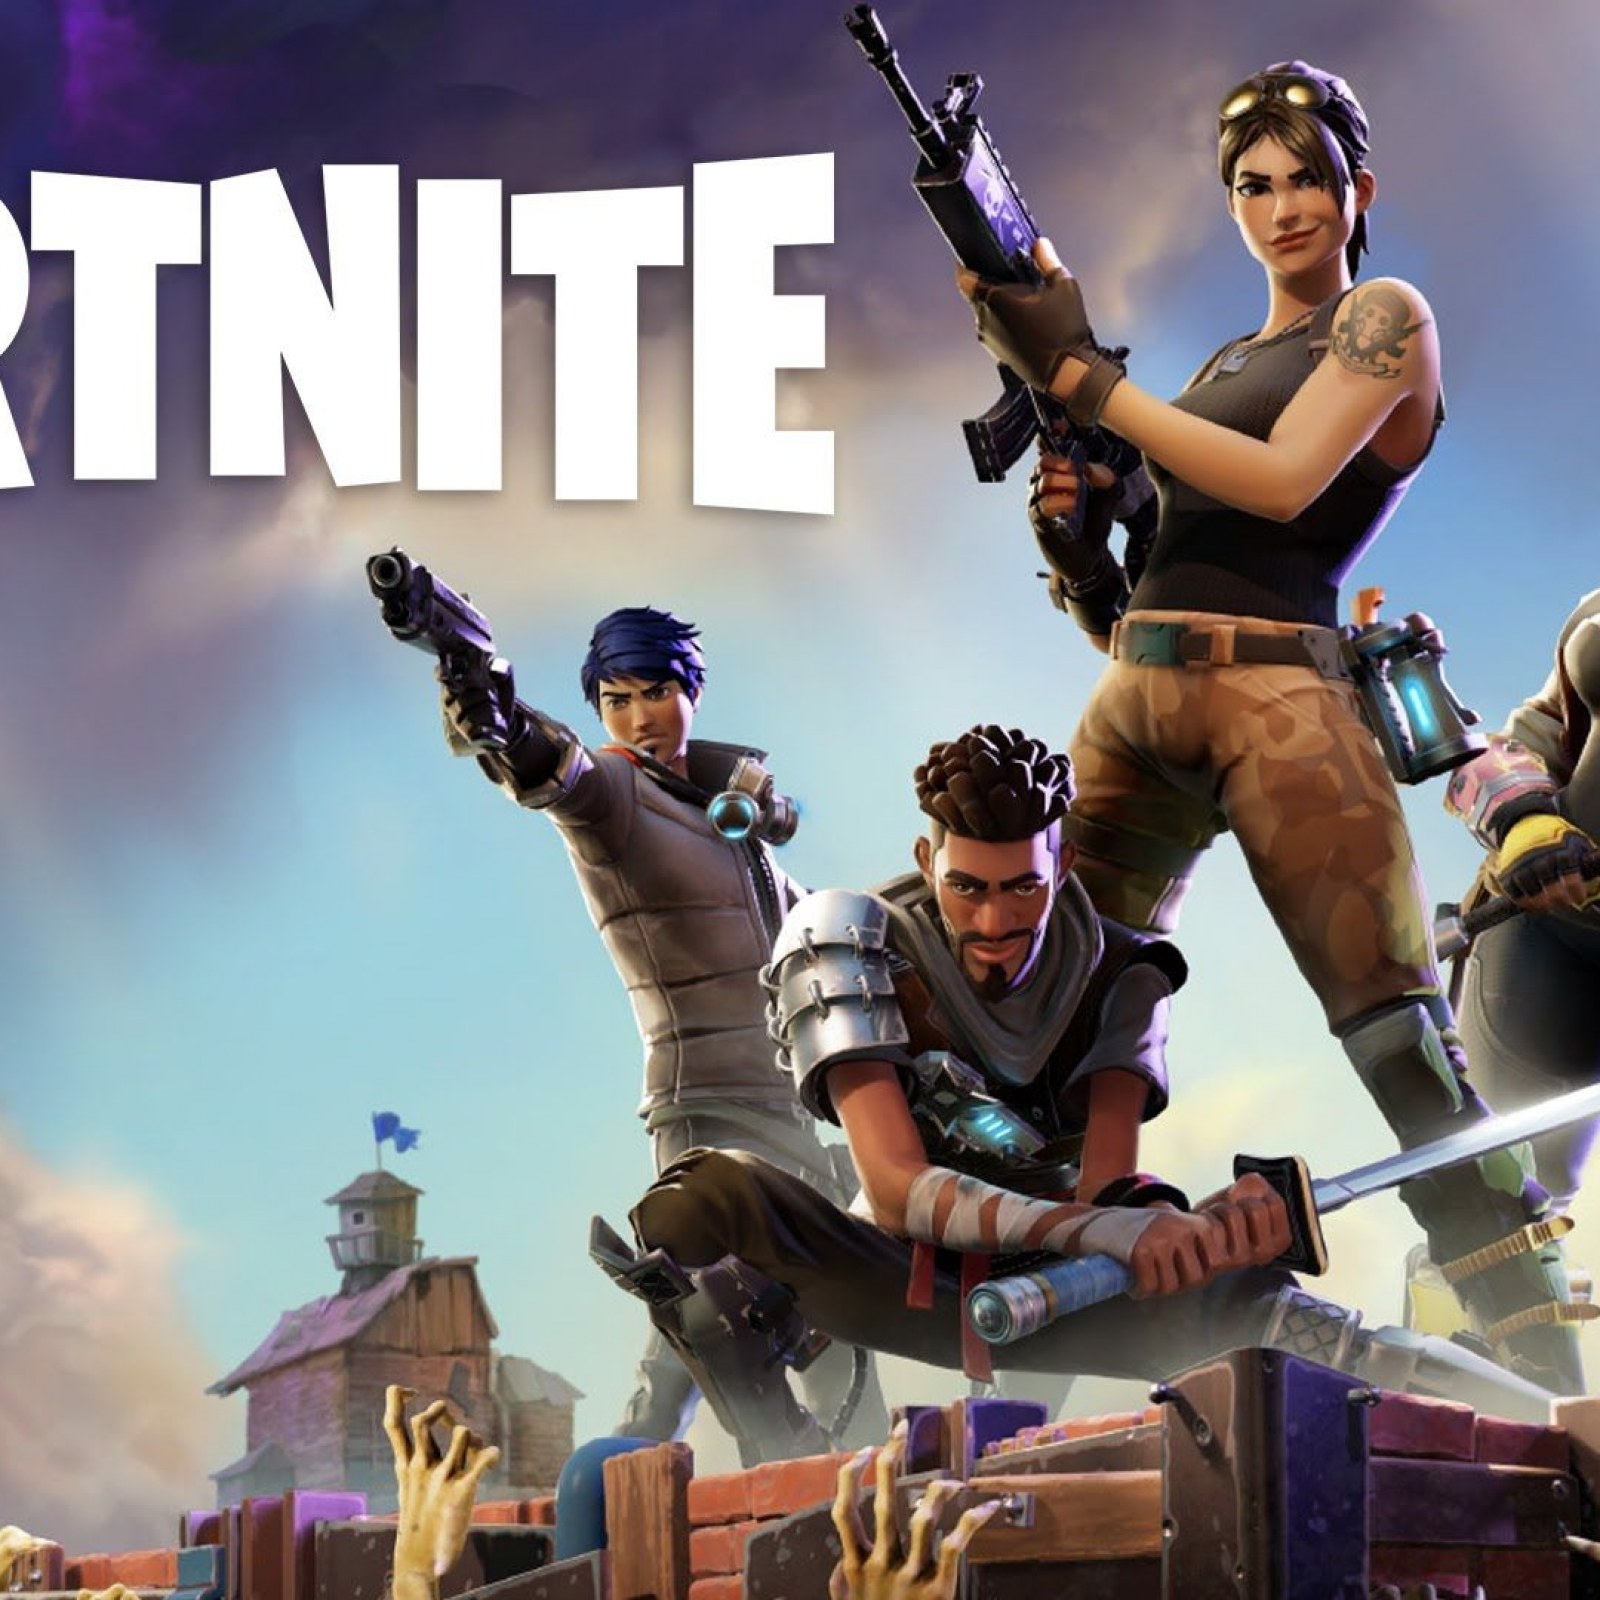 Fortnite crossplay (Nintendo Switch, Xbox One, PC, Mac, Mobile) confirmed,  Sony blocking PS4